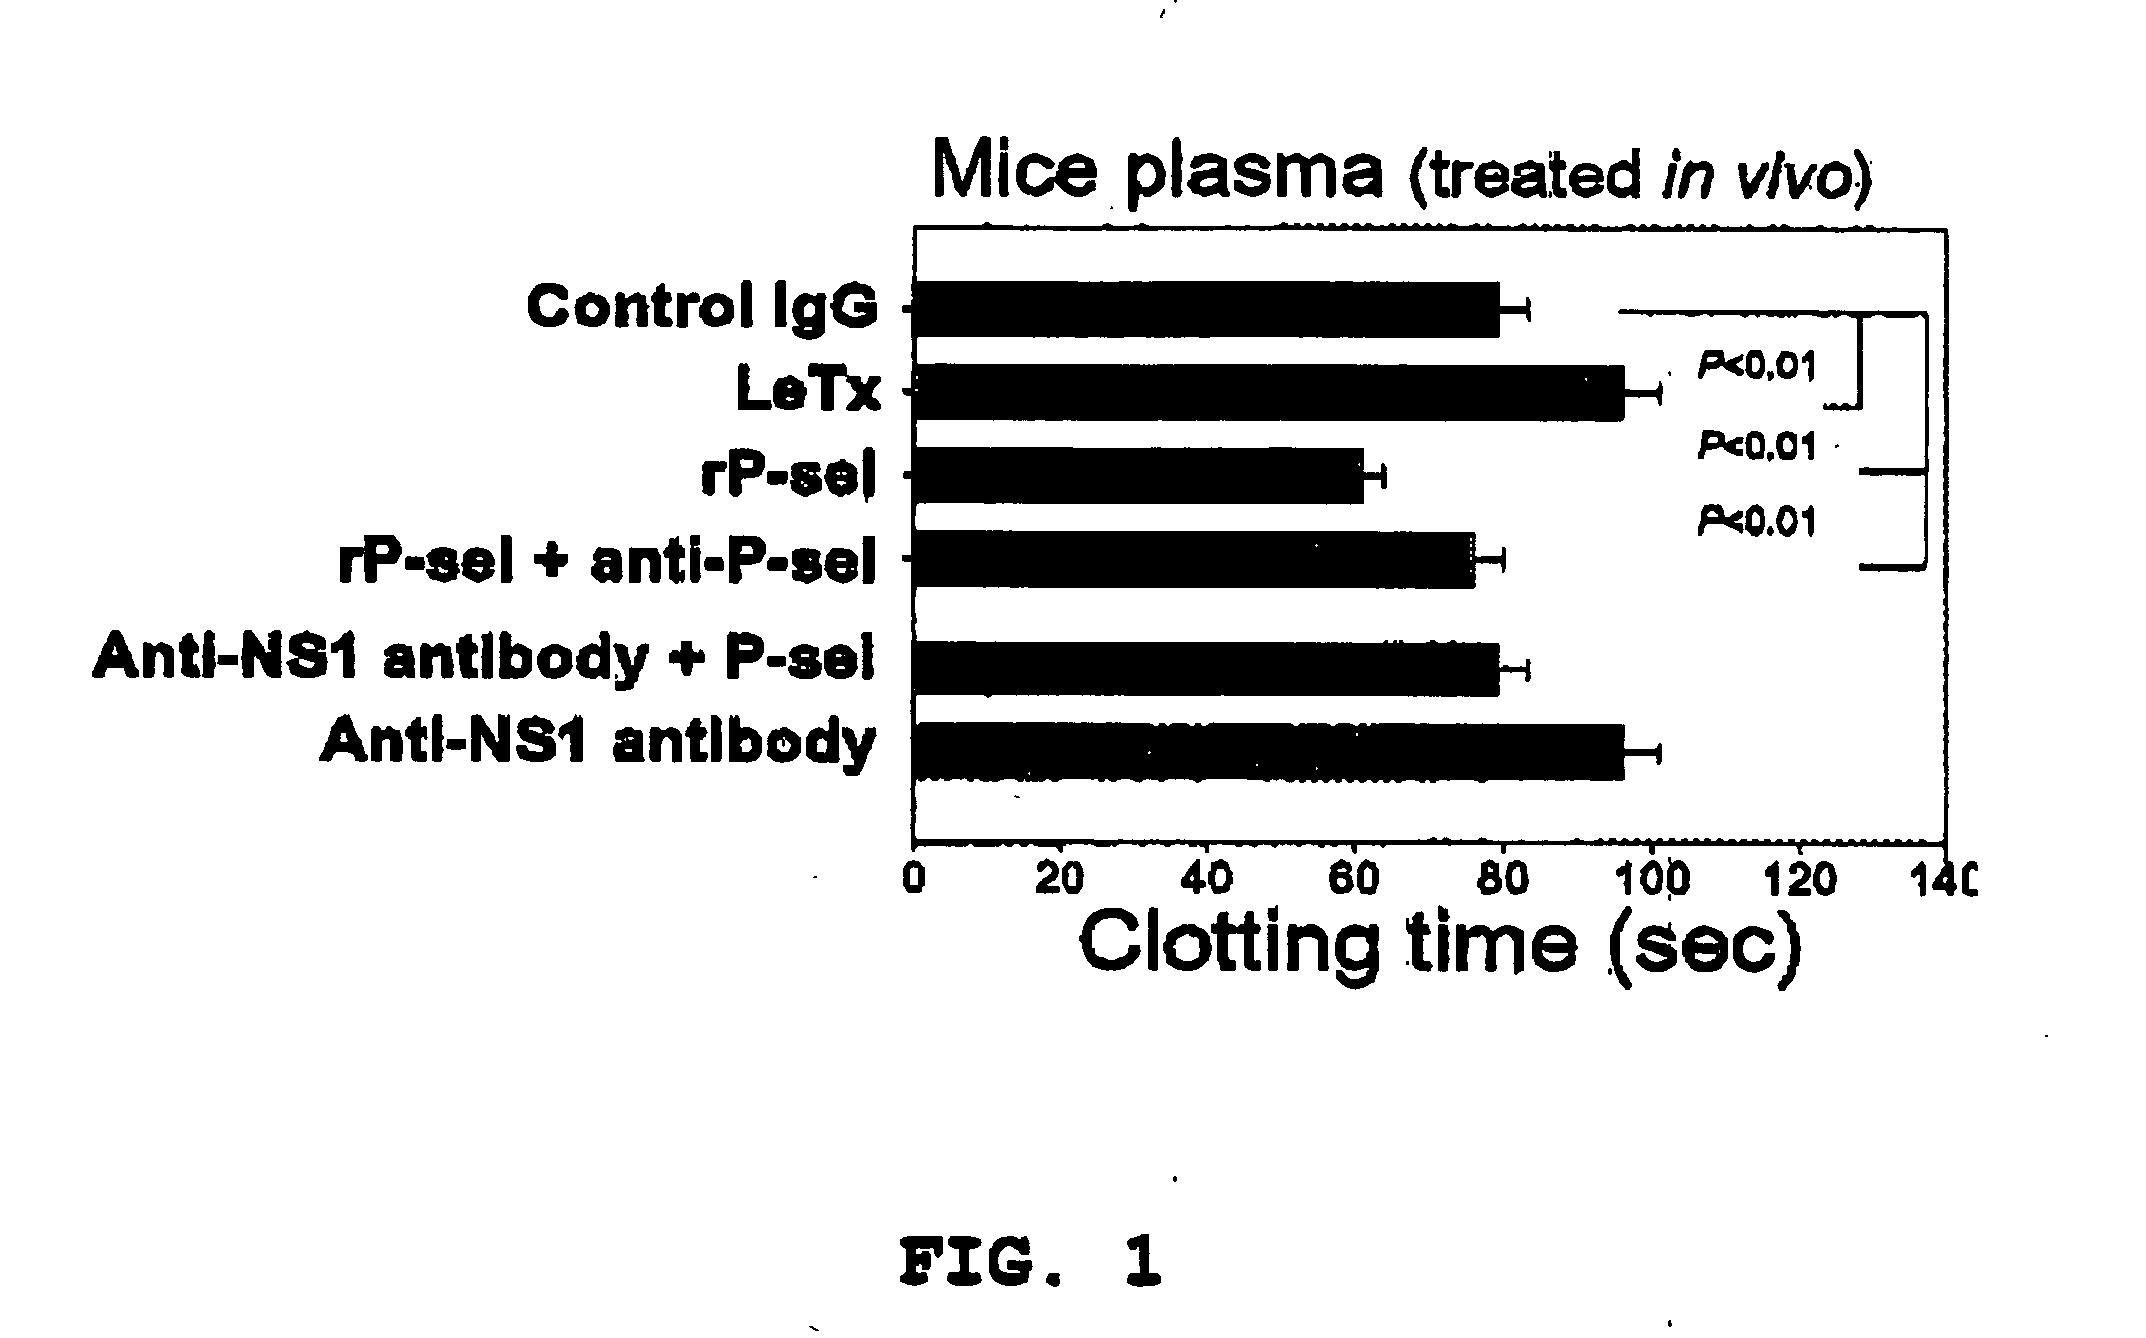 Use of soluble P-selectin and anthrax lethal toxin